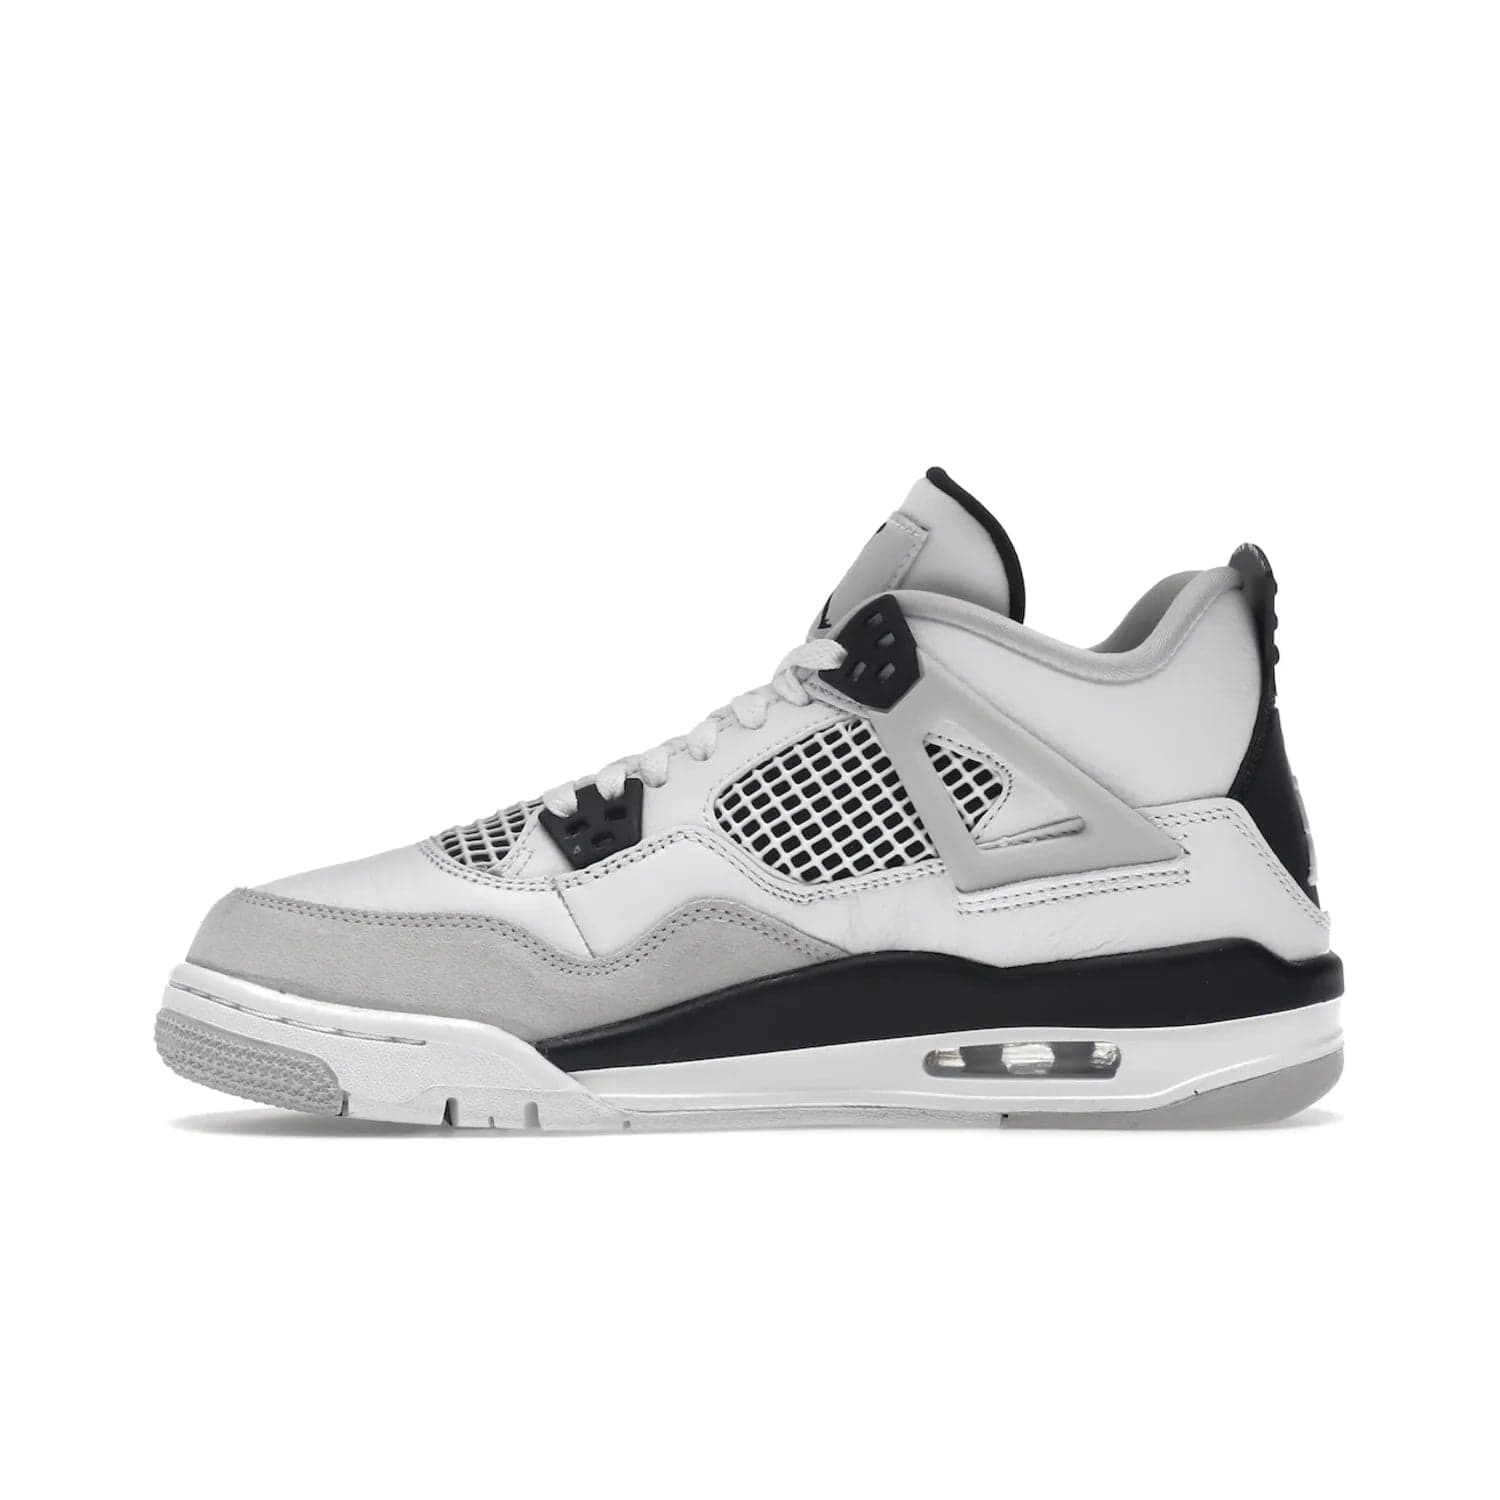 Jordan 4 Retro Military Black (GS) - Image 19 - Only at www.BallersClubKickz.com - A must-have for grade schoolers, the Air Jordan 4 Retro Military Black (GS) offers classic style with plenty of breathable support. Featuring a white sole and base with suede and leather overlays in subtle black and grey tones, the shoes are perfect for active pursuits and everyday comfort. Get an instant classic today!